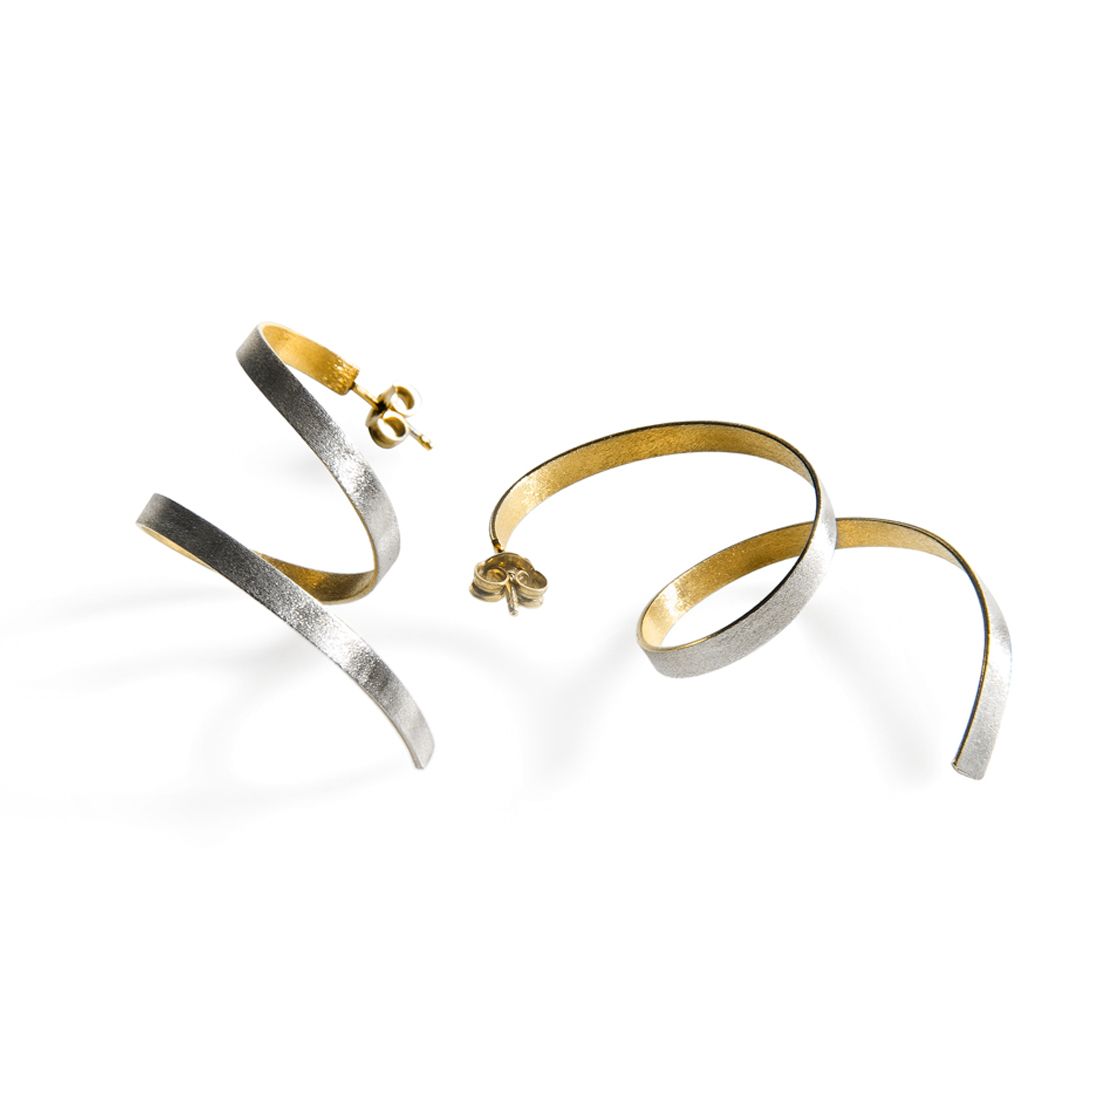 Elegant coil earrings strike the perfect balance between gold and silver.